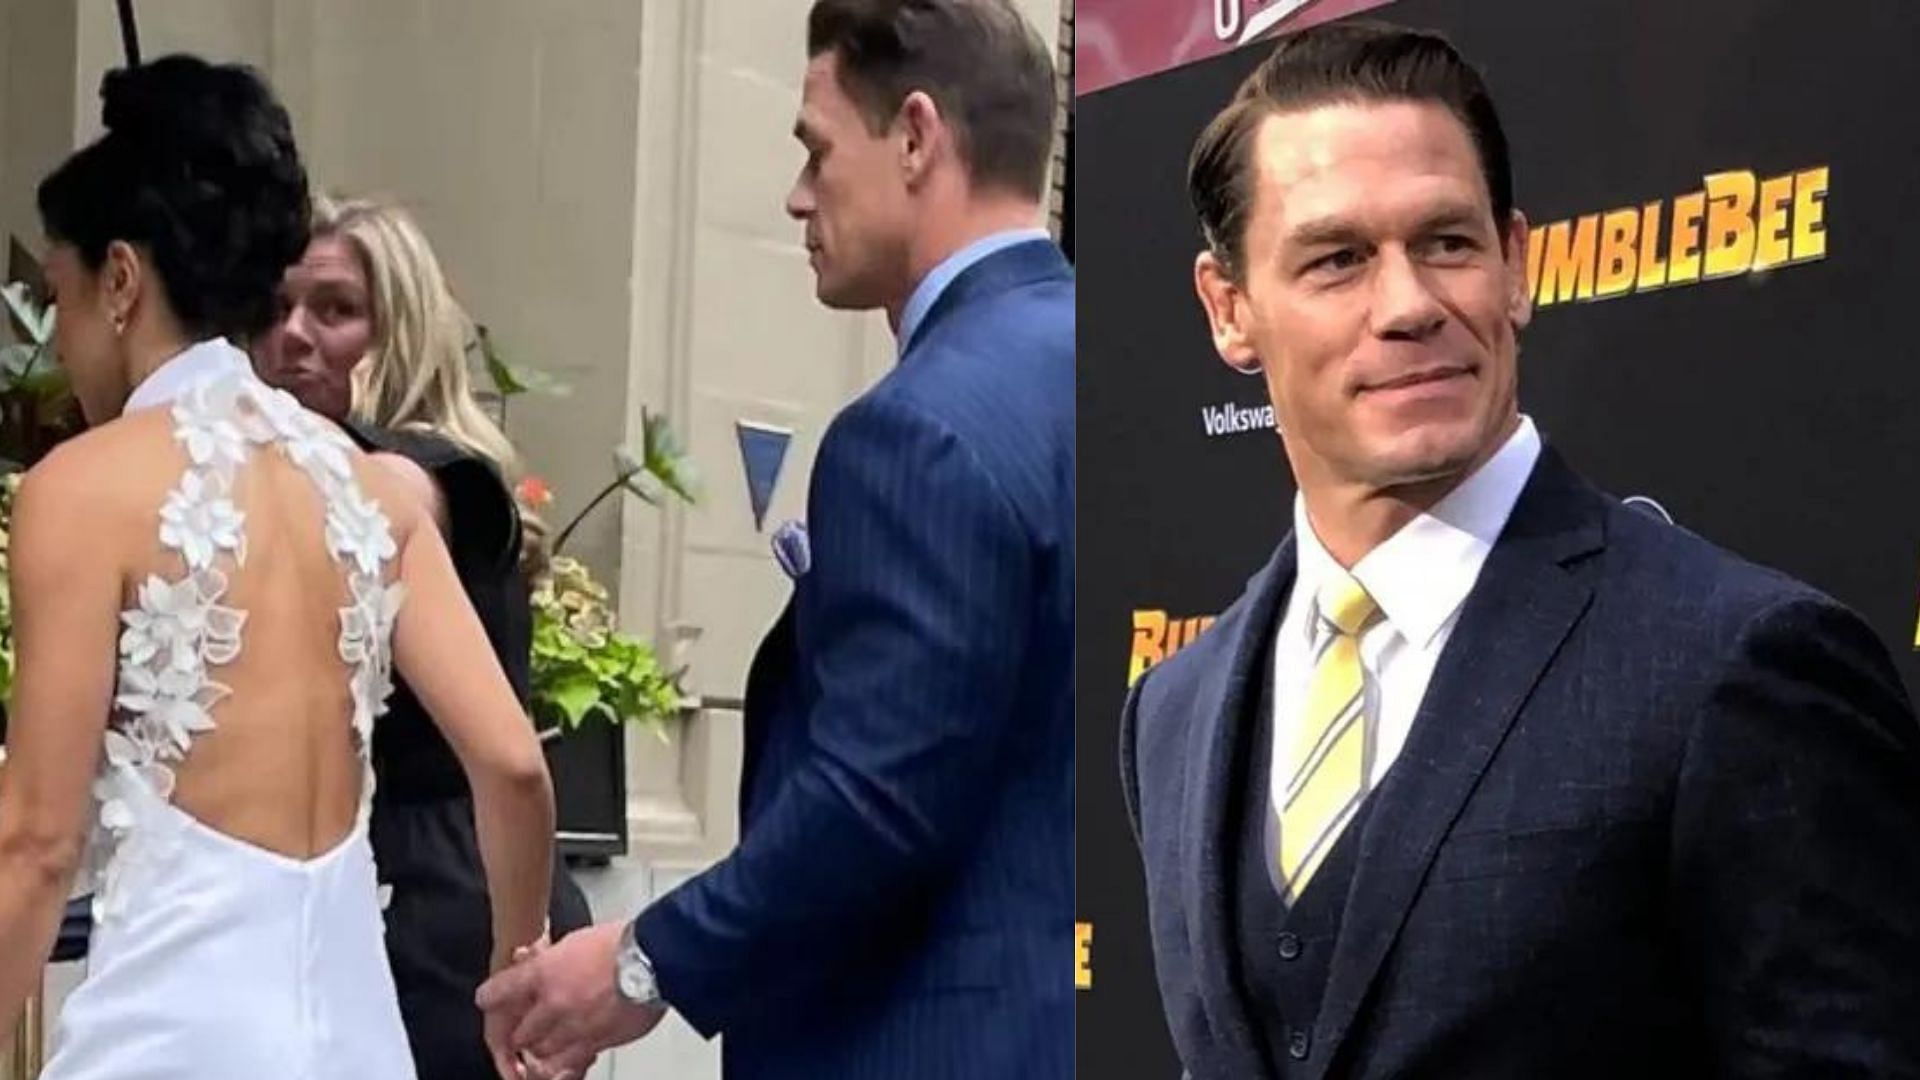 John Cena is currently married to his wife who he met in 2019